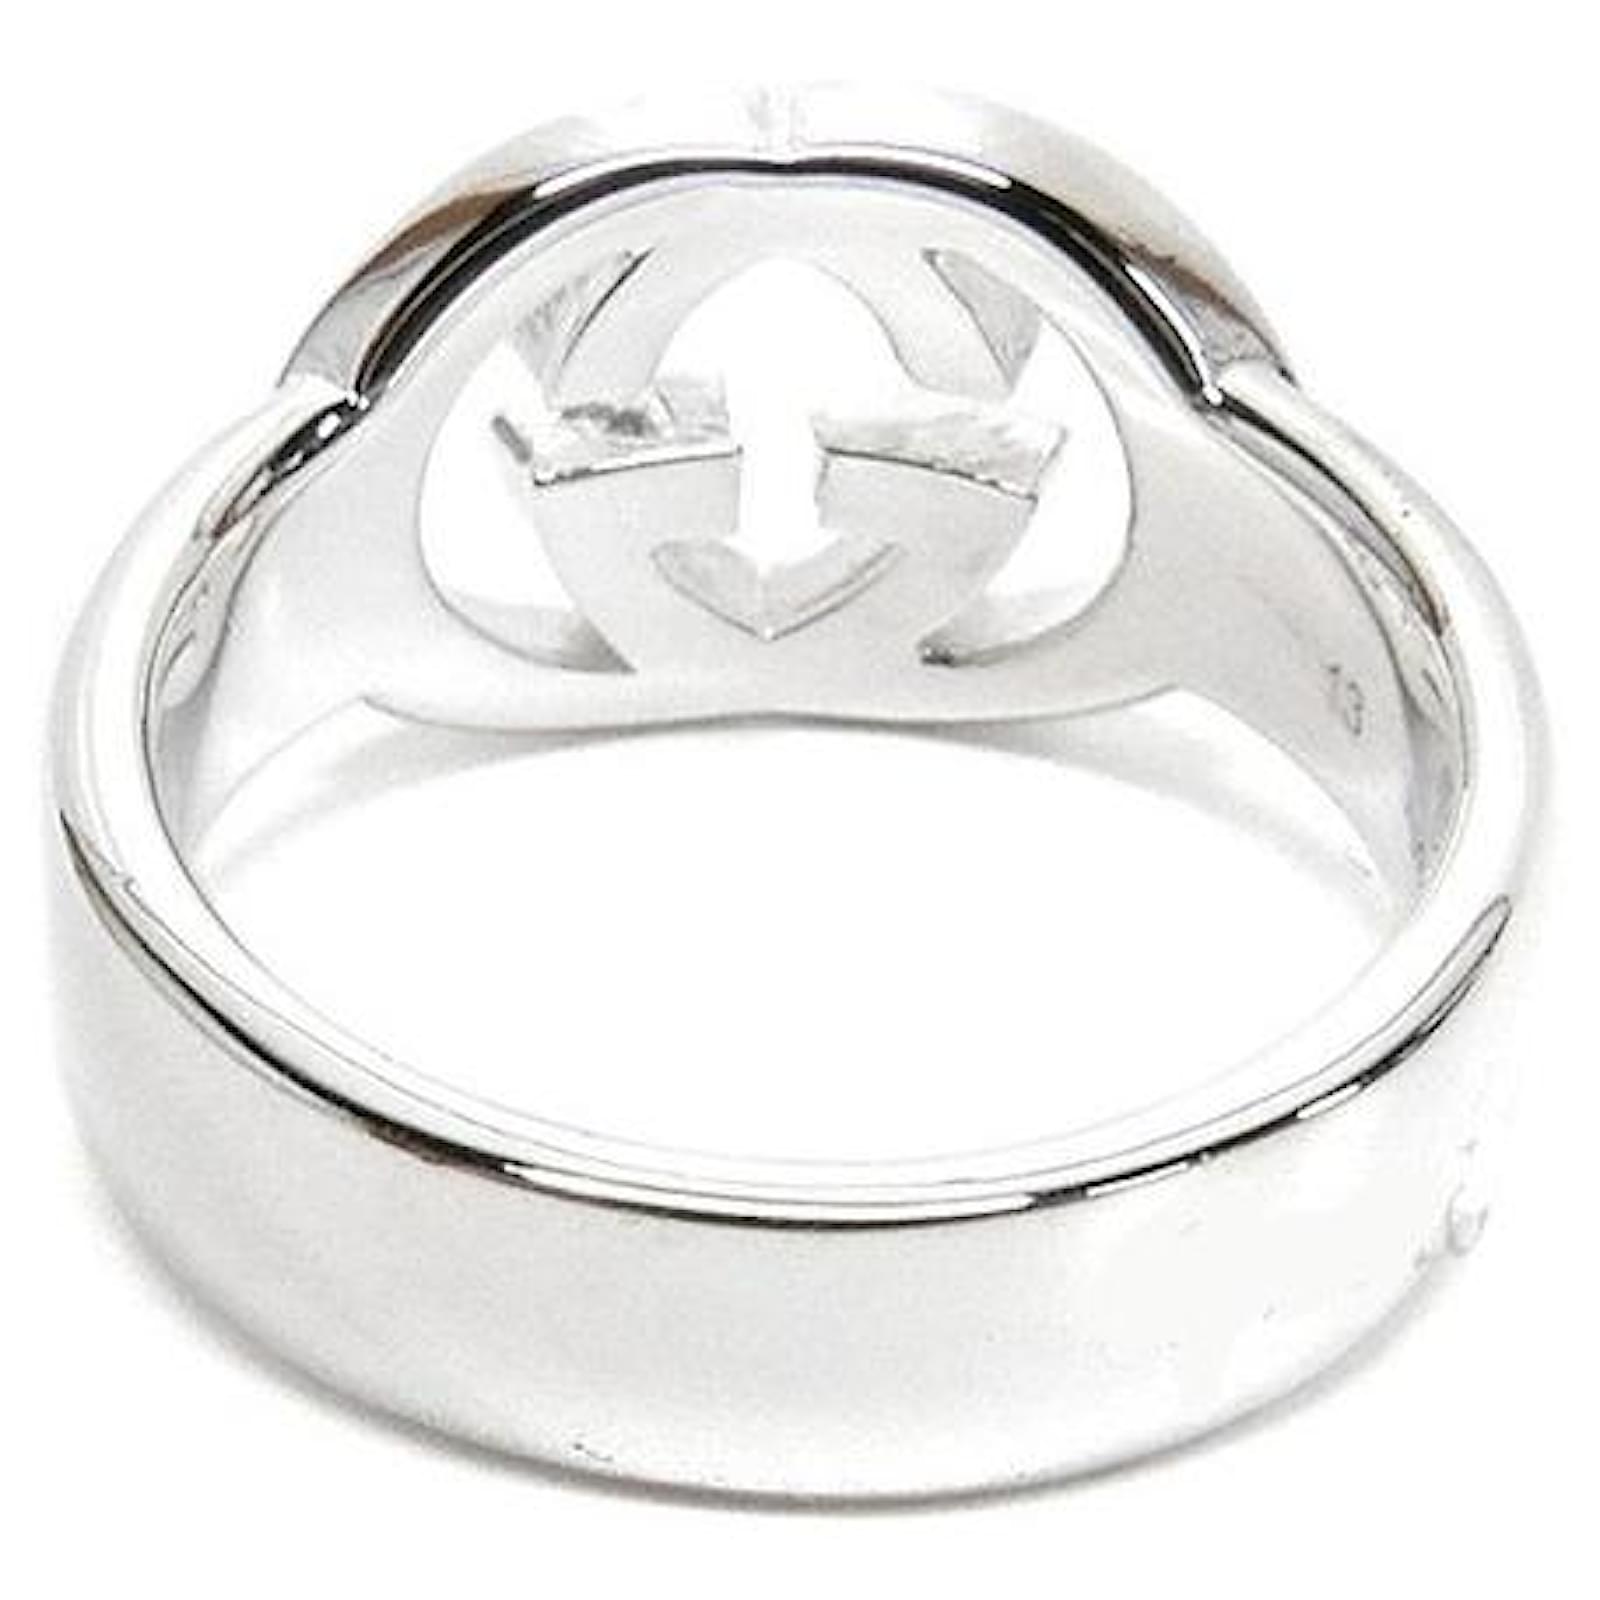 Used] Gucci Ring GUCCI Men's Ring Silver Brit Silver Silvery ref